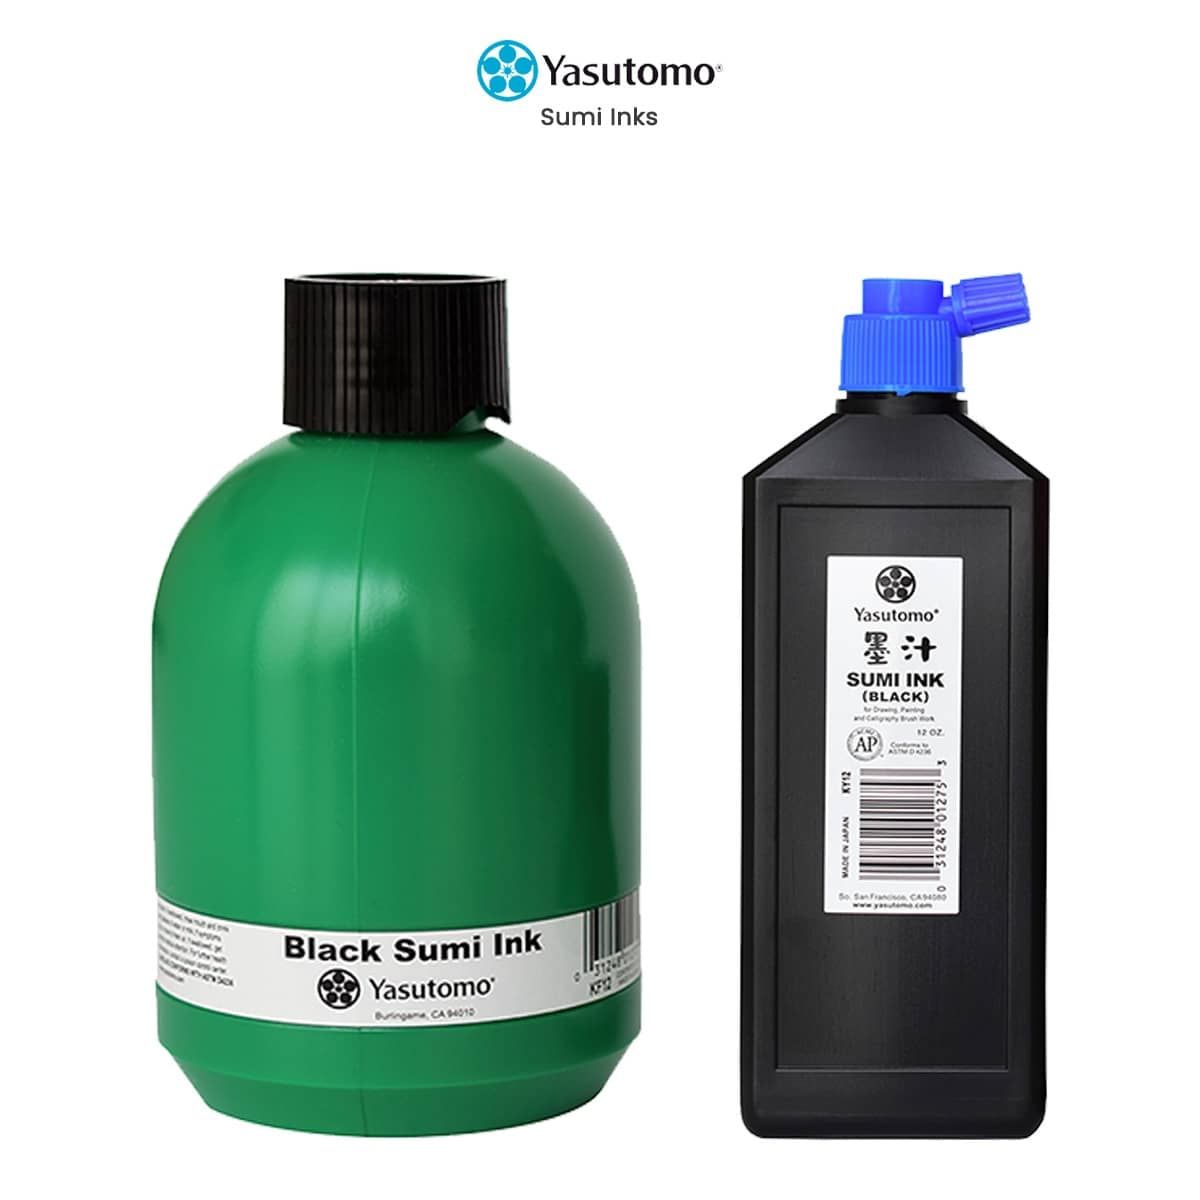 Yasutomo Bokuju Liquid Ink - 12oz Sumi Ink for Calligraphy and Artwork -  Black Drawing Ink for use with Japanese Ink Brushes and Dip Pens